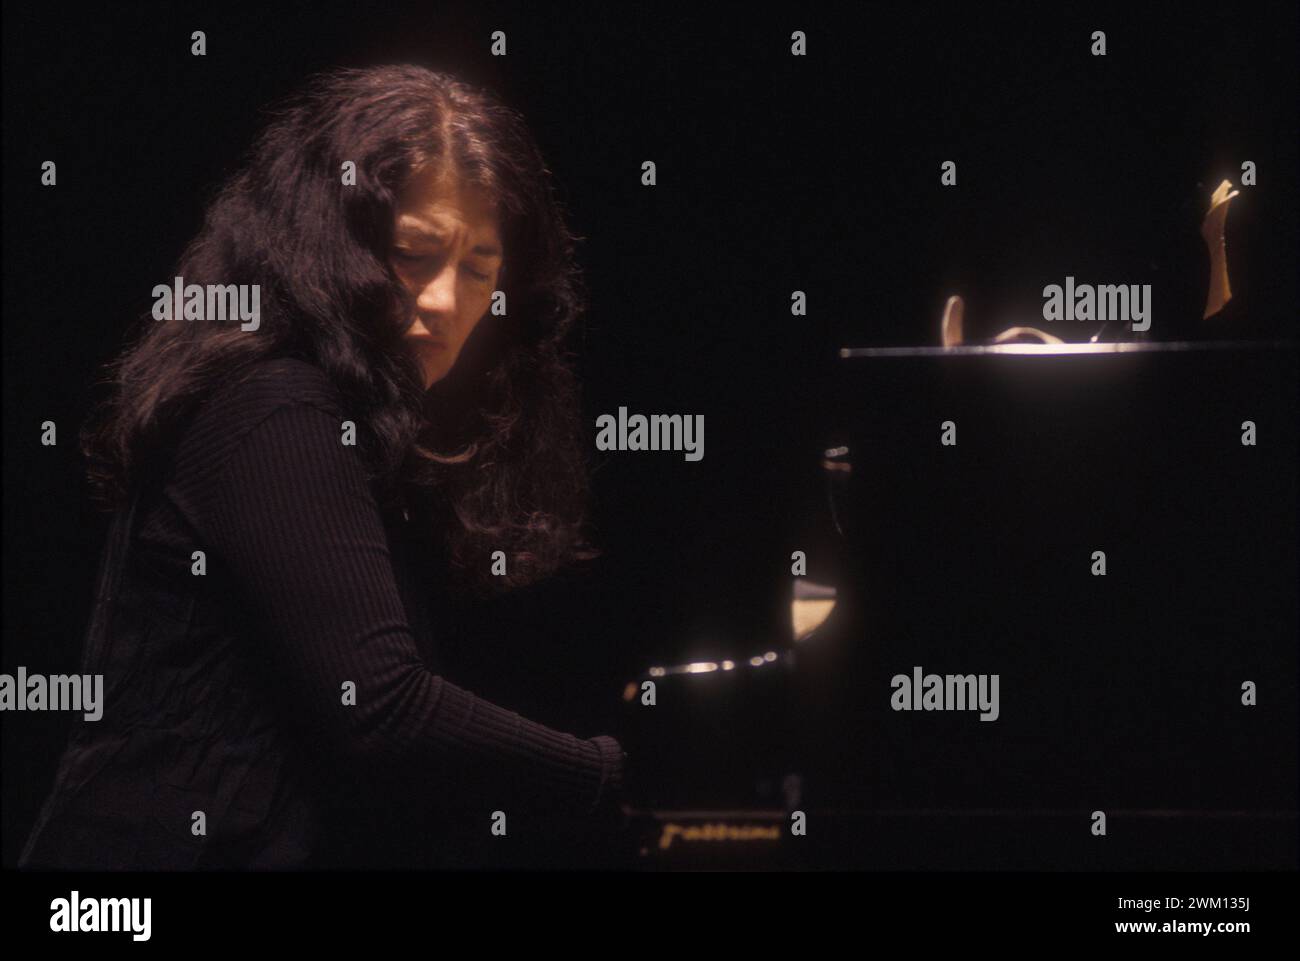 3827289 Martha Argerich; (add.info.: Rome, 1995. Argentine pianist Martha Argerich / Rome, 1995. La pianista argentina Martha Argerich); © Marcello Mencarini. All rights reserved 2024. Stock Photo